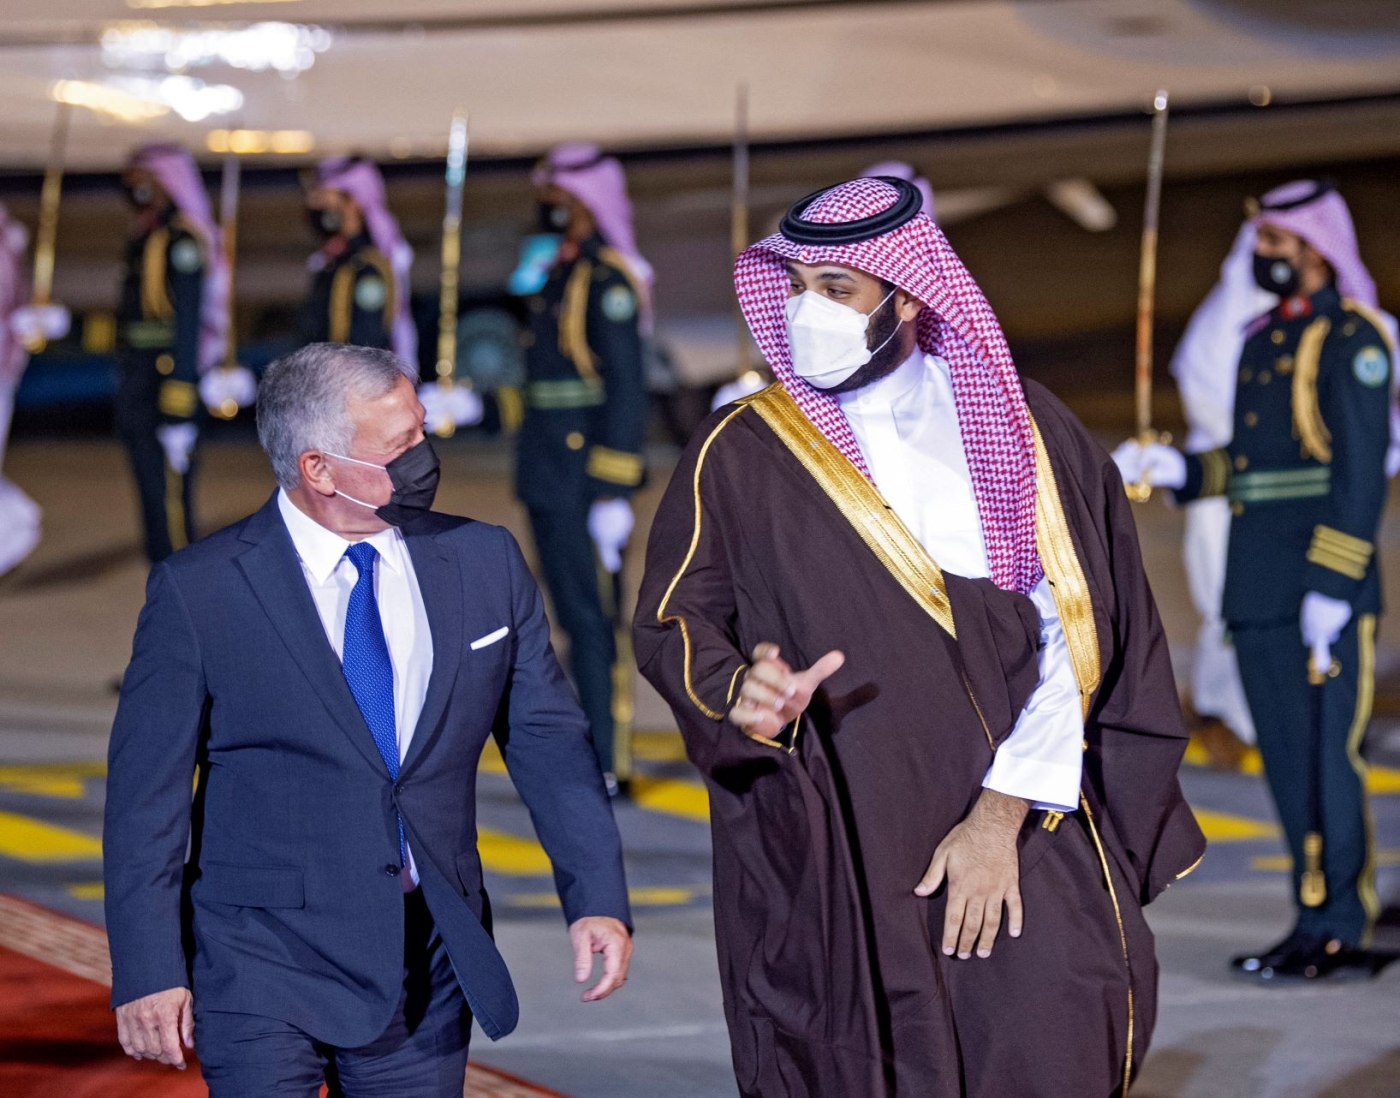 A handout picture provided by the Saudi Royal Palace on March 8, 2021, shows Crown Prince Mohammed bin Salman welcoming Jordan's King Abdullah II (L) upon his arrival in the capital Riyadh (AFP)